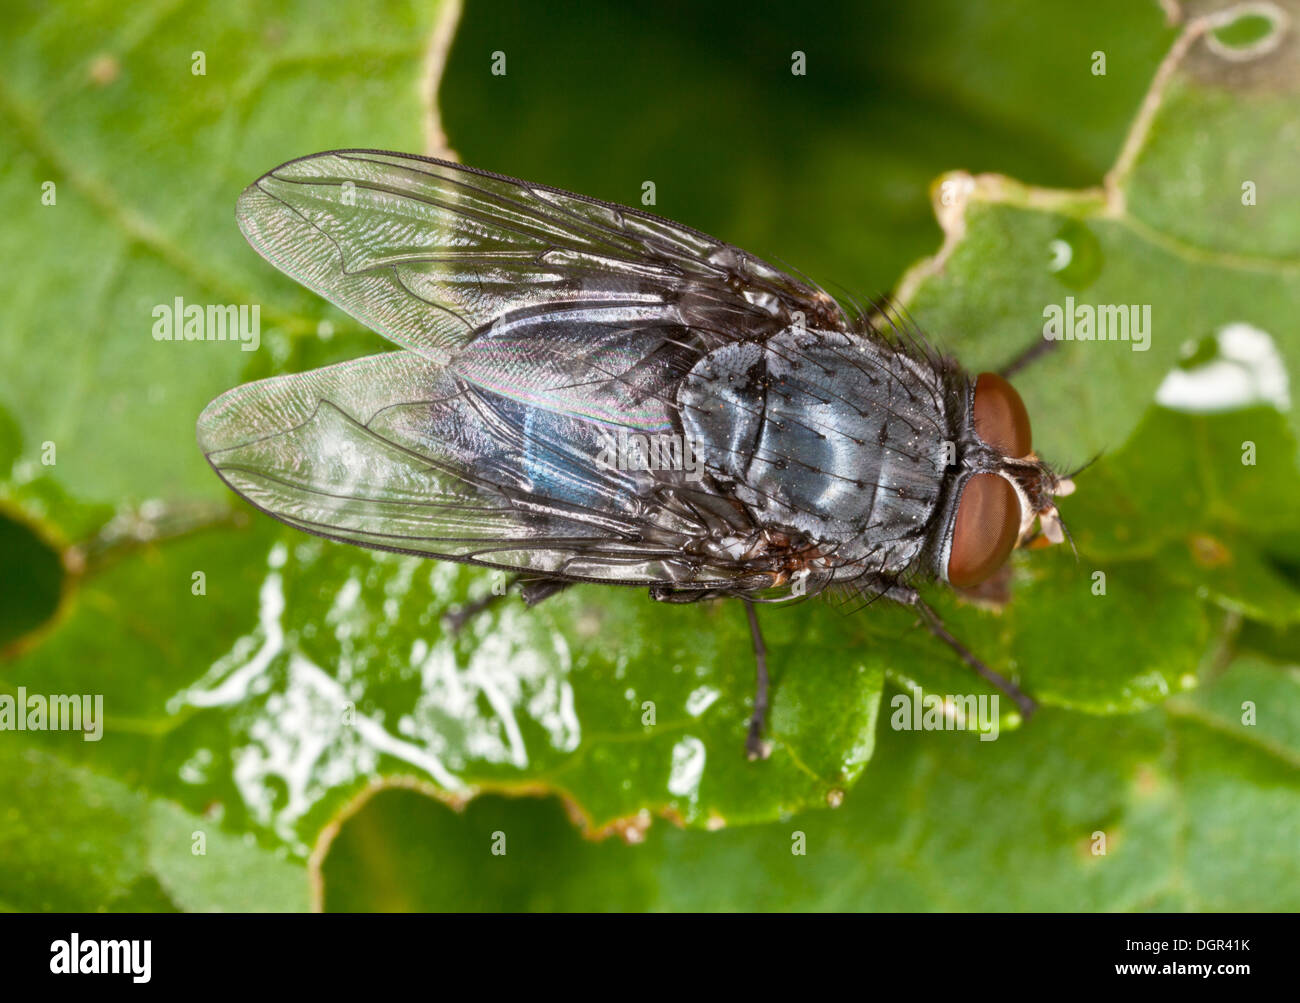 Urban bluebottle blowfly, Calliphora vicina in autumn, on leaf. One of the key forensic entomolgy species. Dorset. Stock Photo